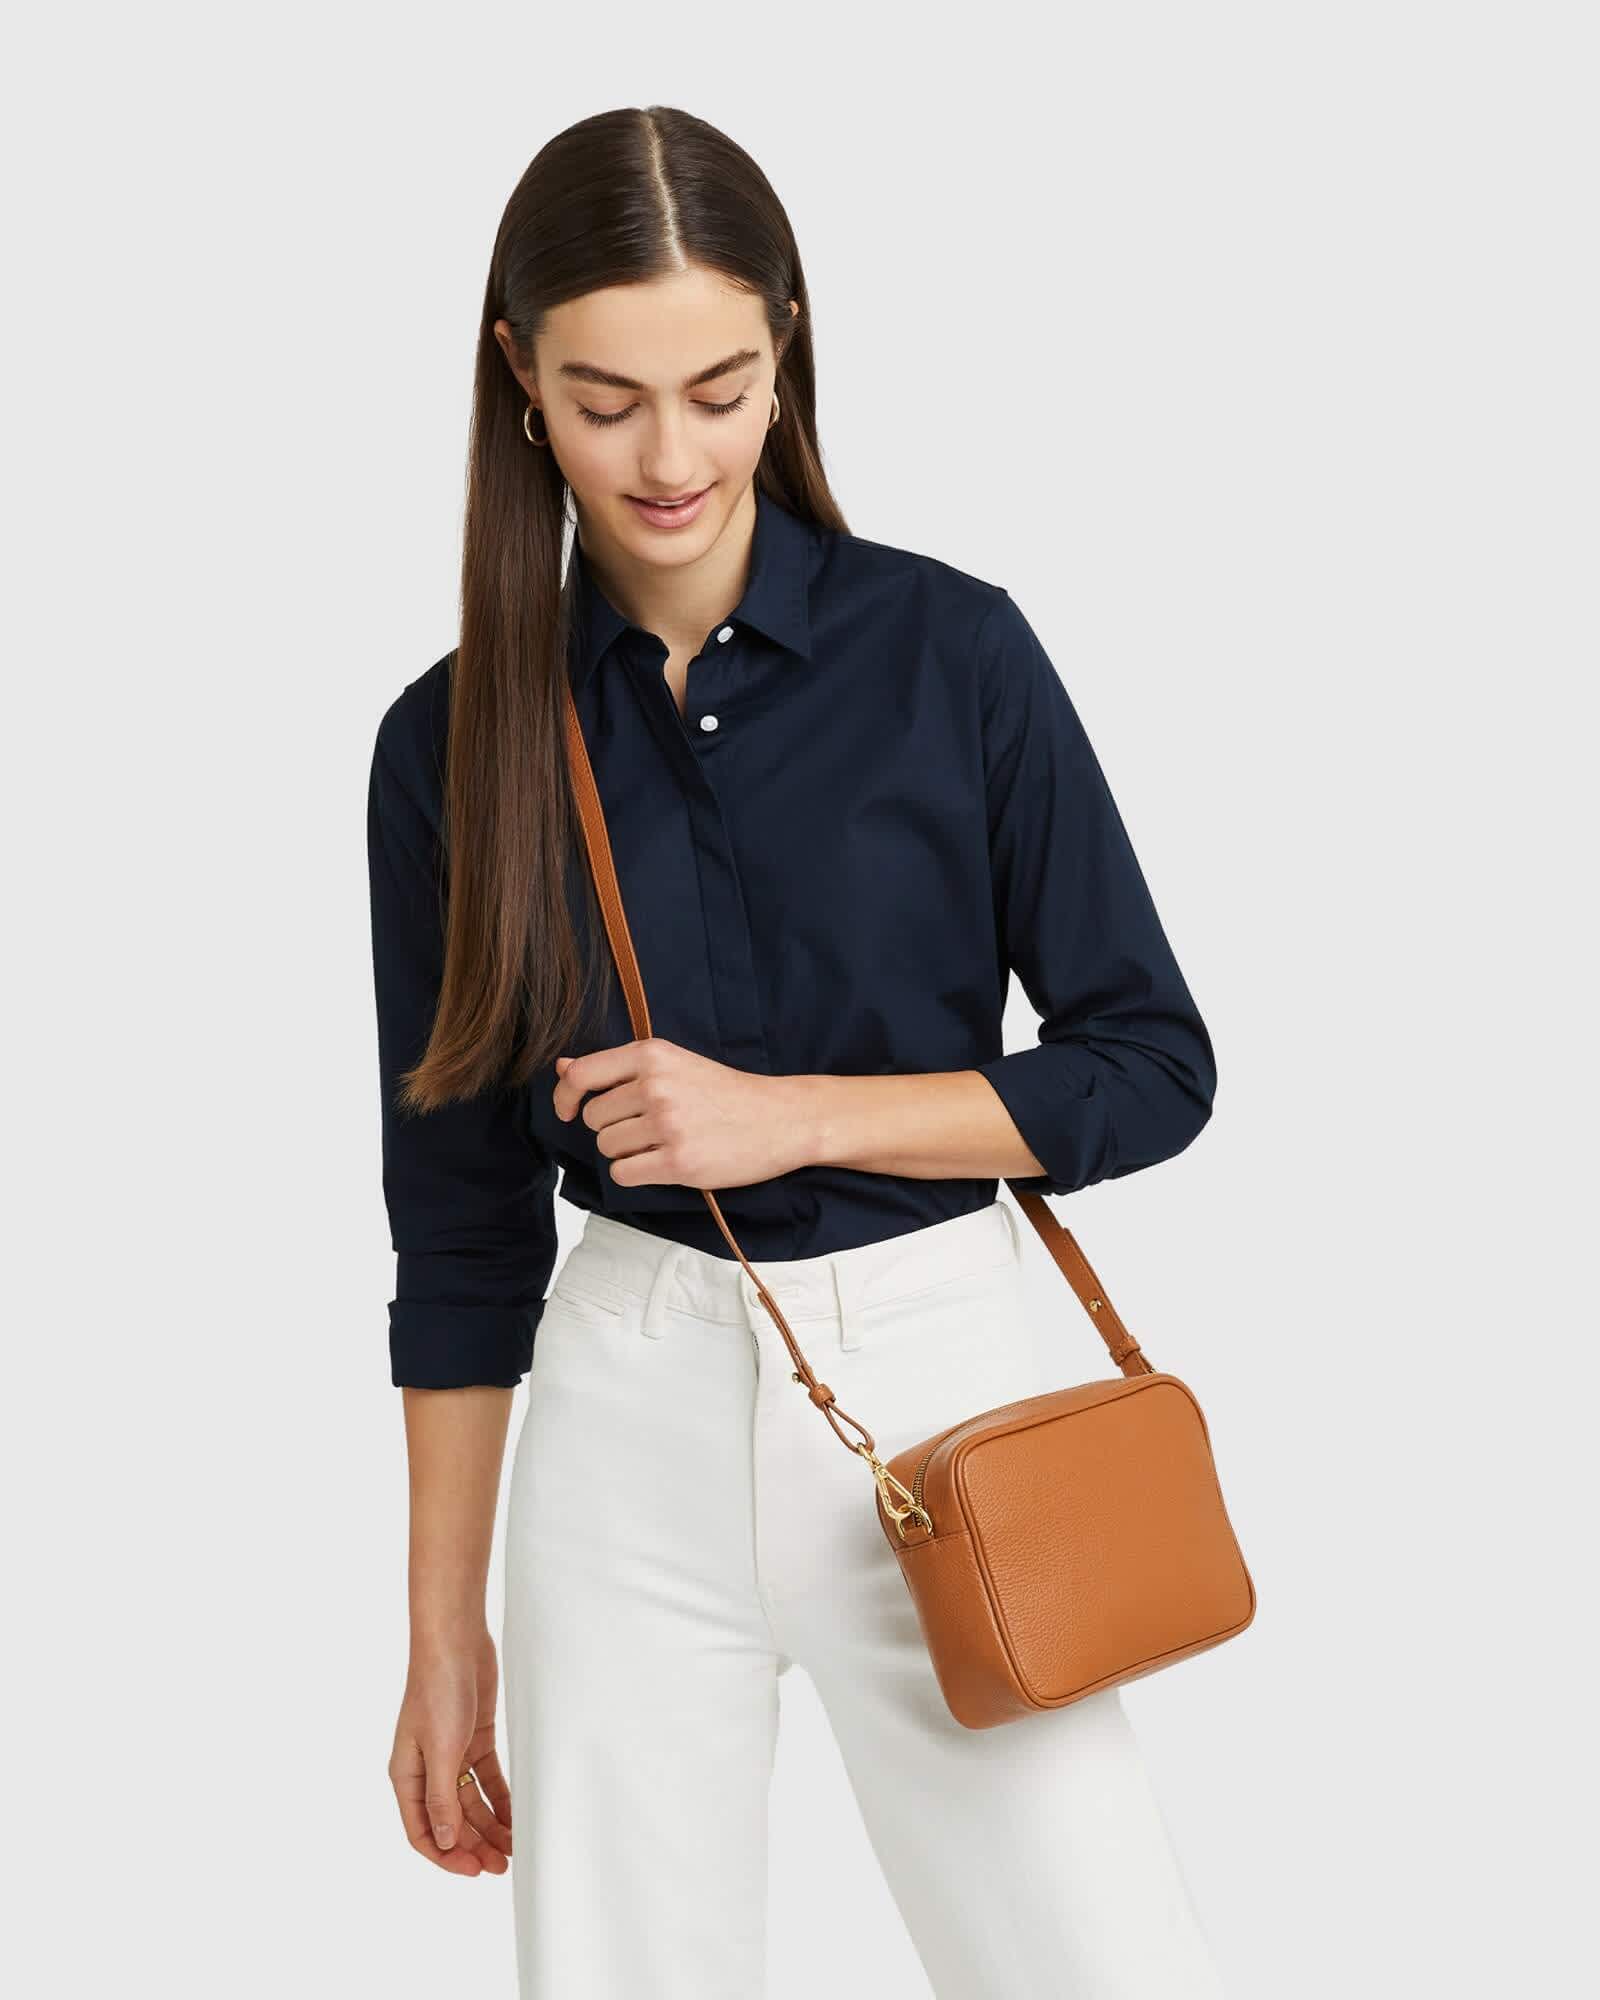 woman wearing Italian leather crossbody bag in brown and blue blouse